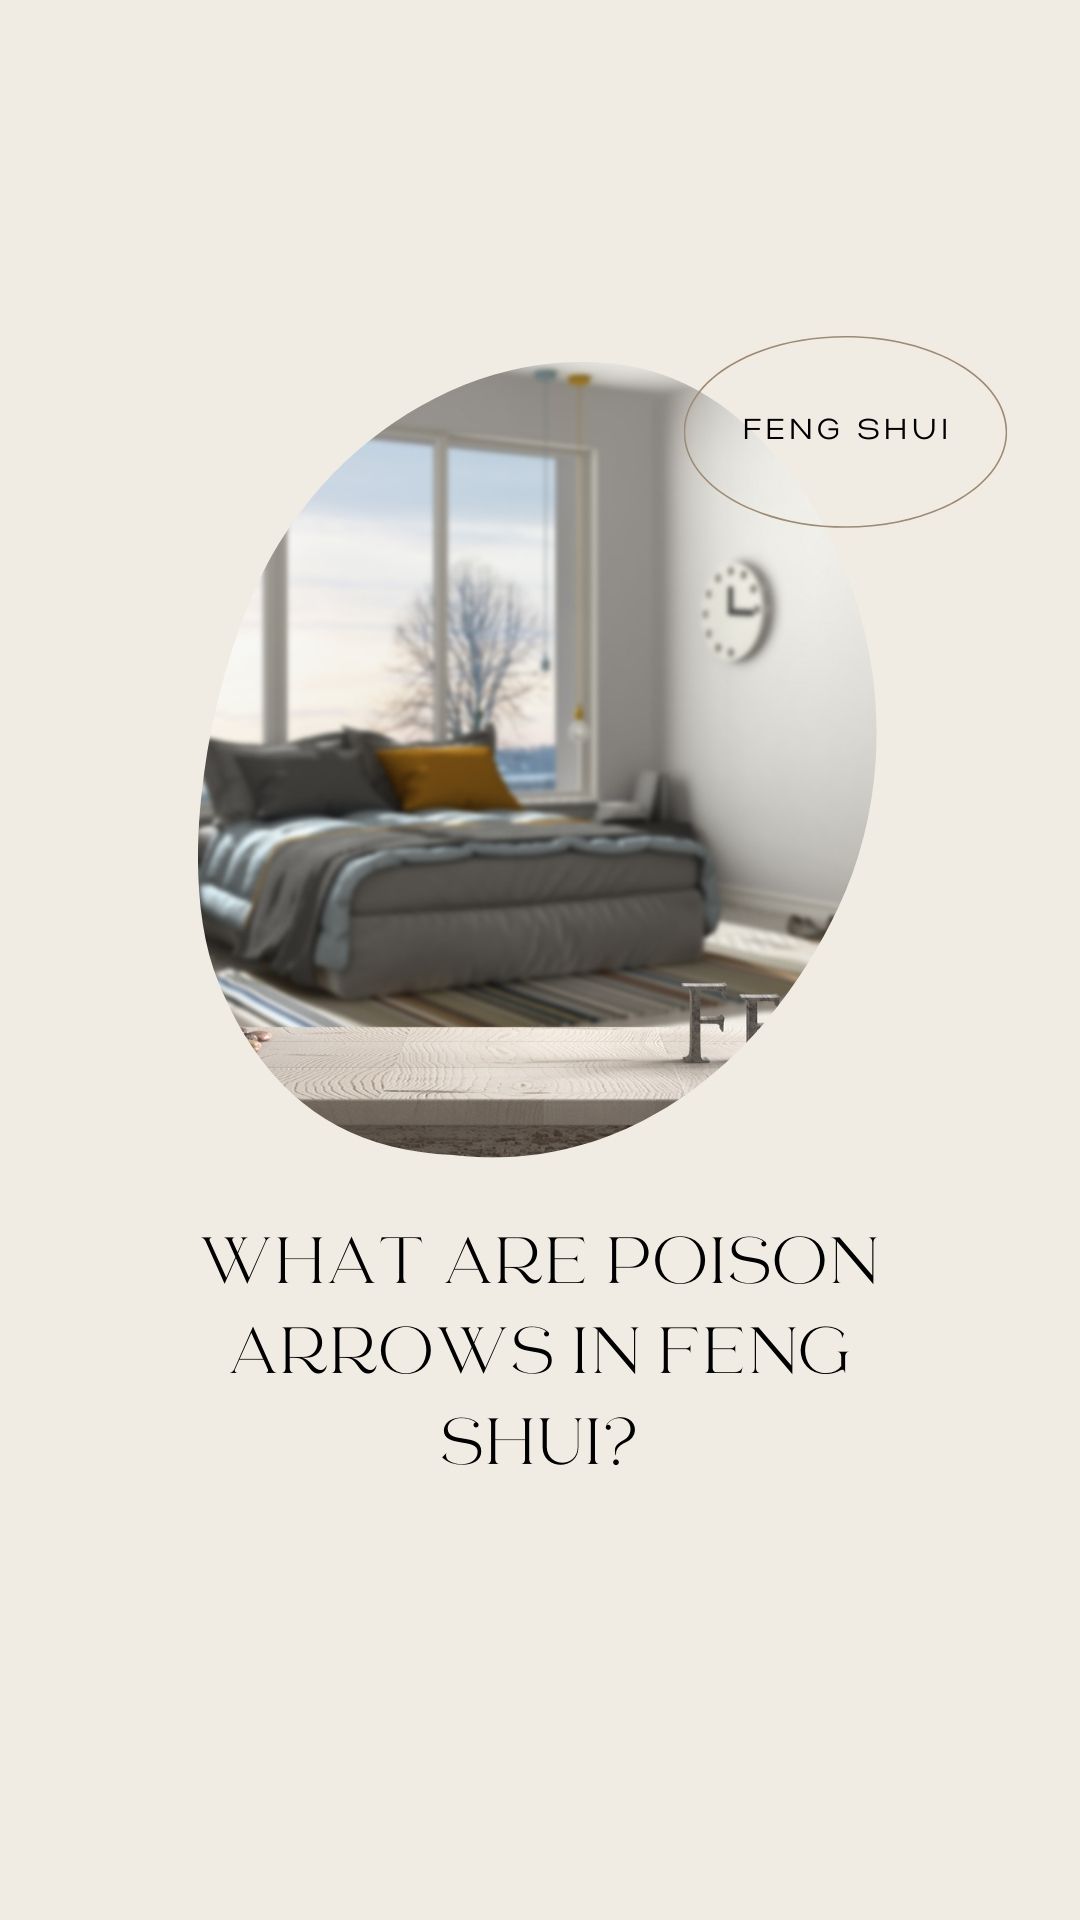 What Are Poison Arrows In Feng Shui?